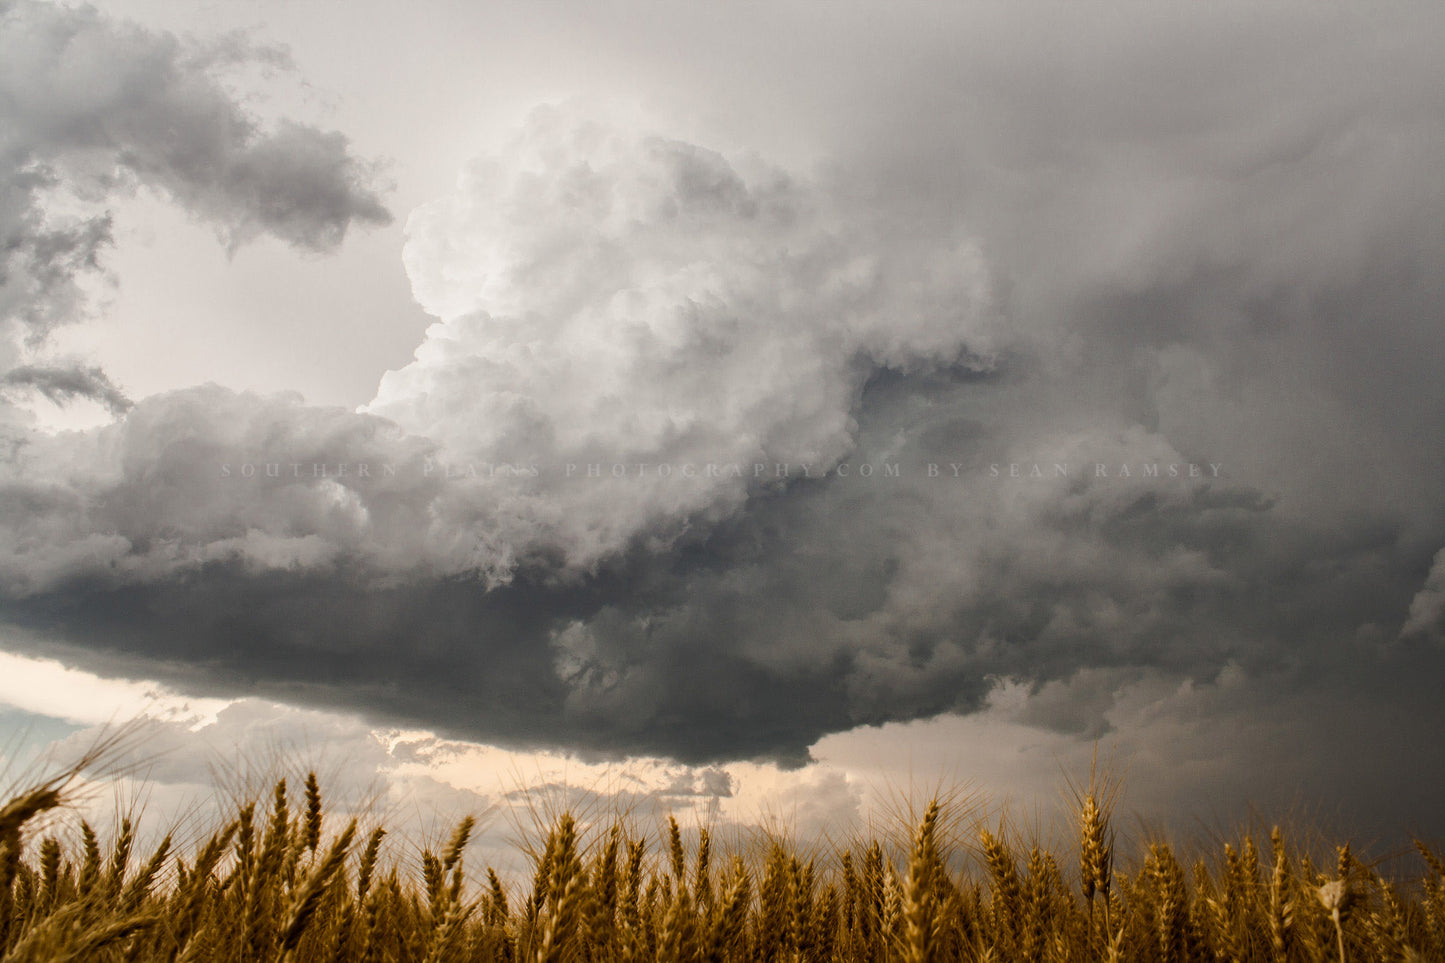 Country photography print of a storm cloud brewing over golden wheat stalks on a stormy spring day in Kansas by Sean Ramsey of Southern Plains Photography.